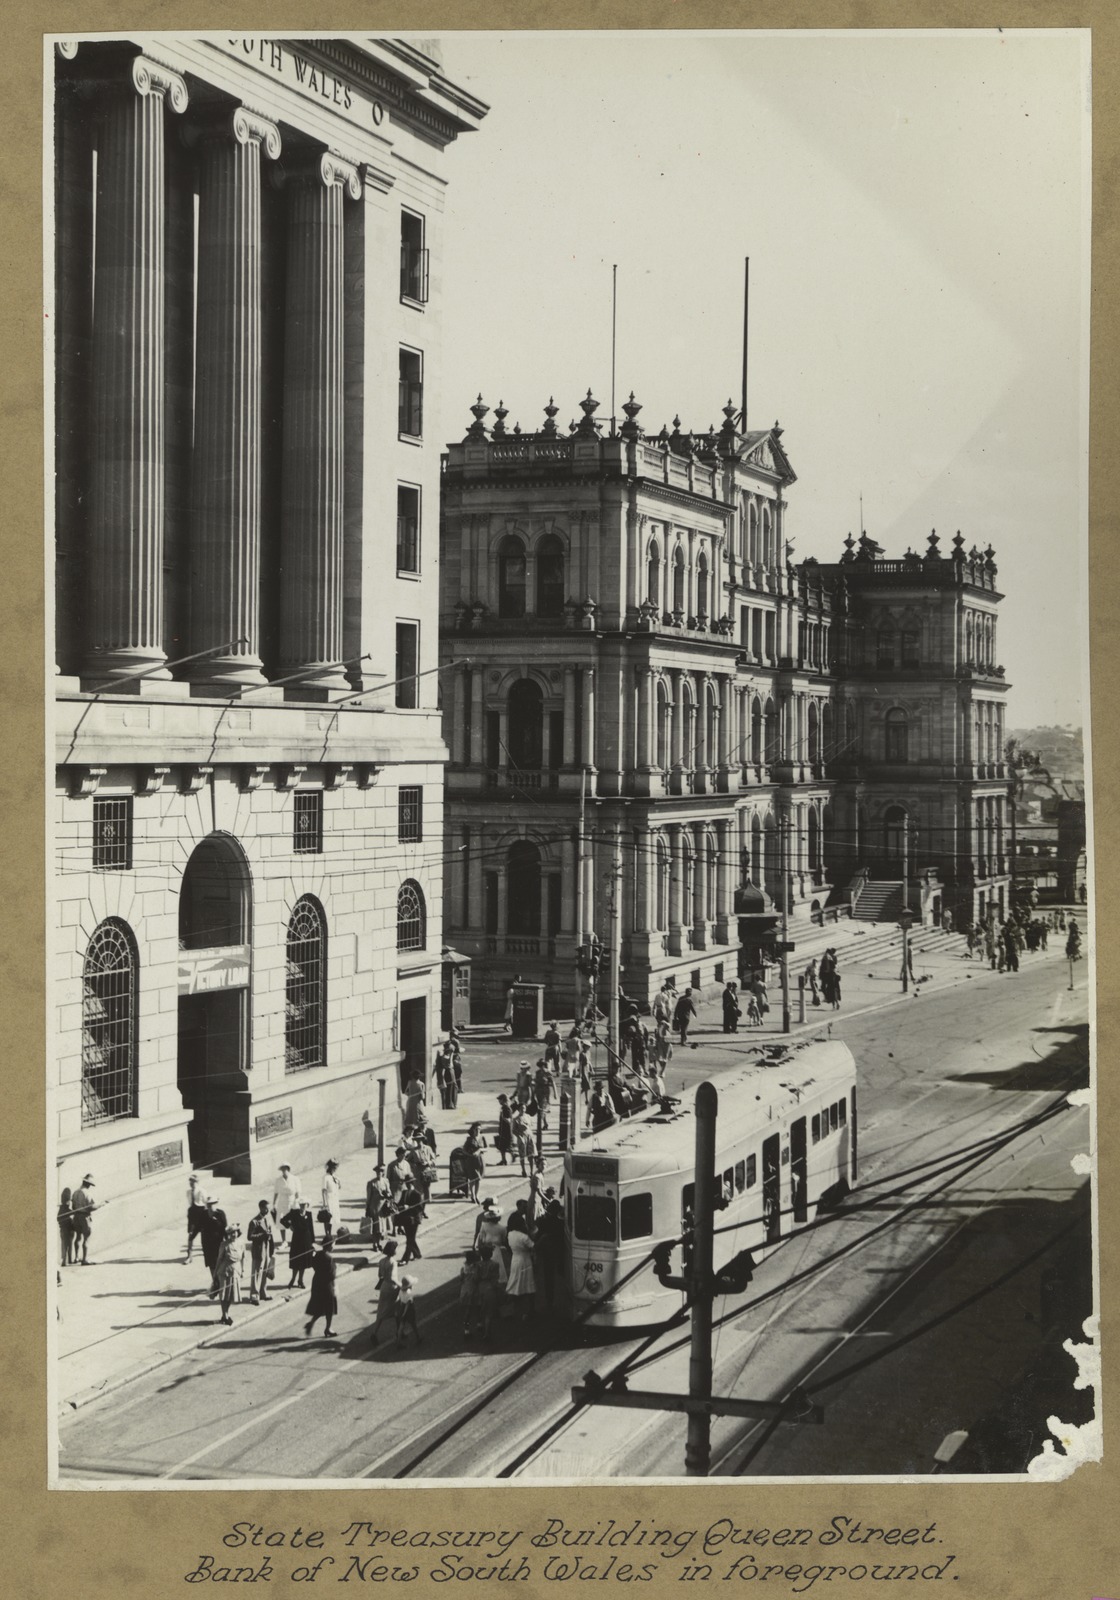 Bank of N.S.W. in foreground, ca. 1938.  Image No. API-075-0001-0002